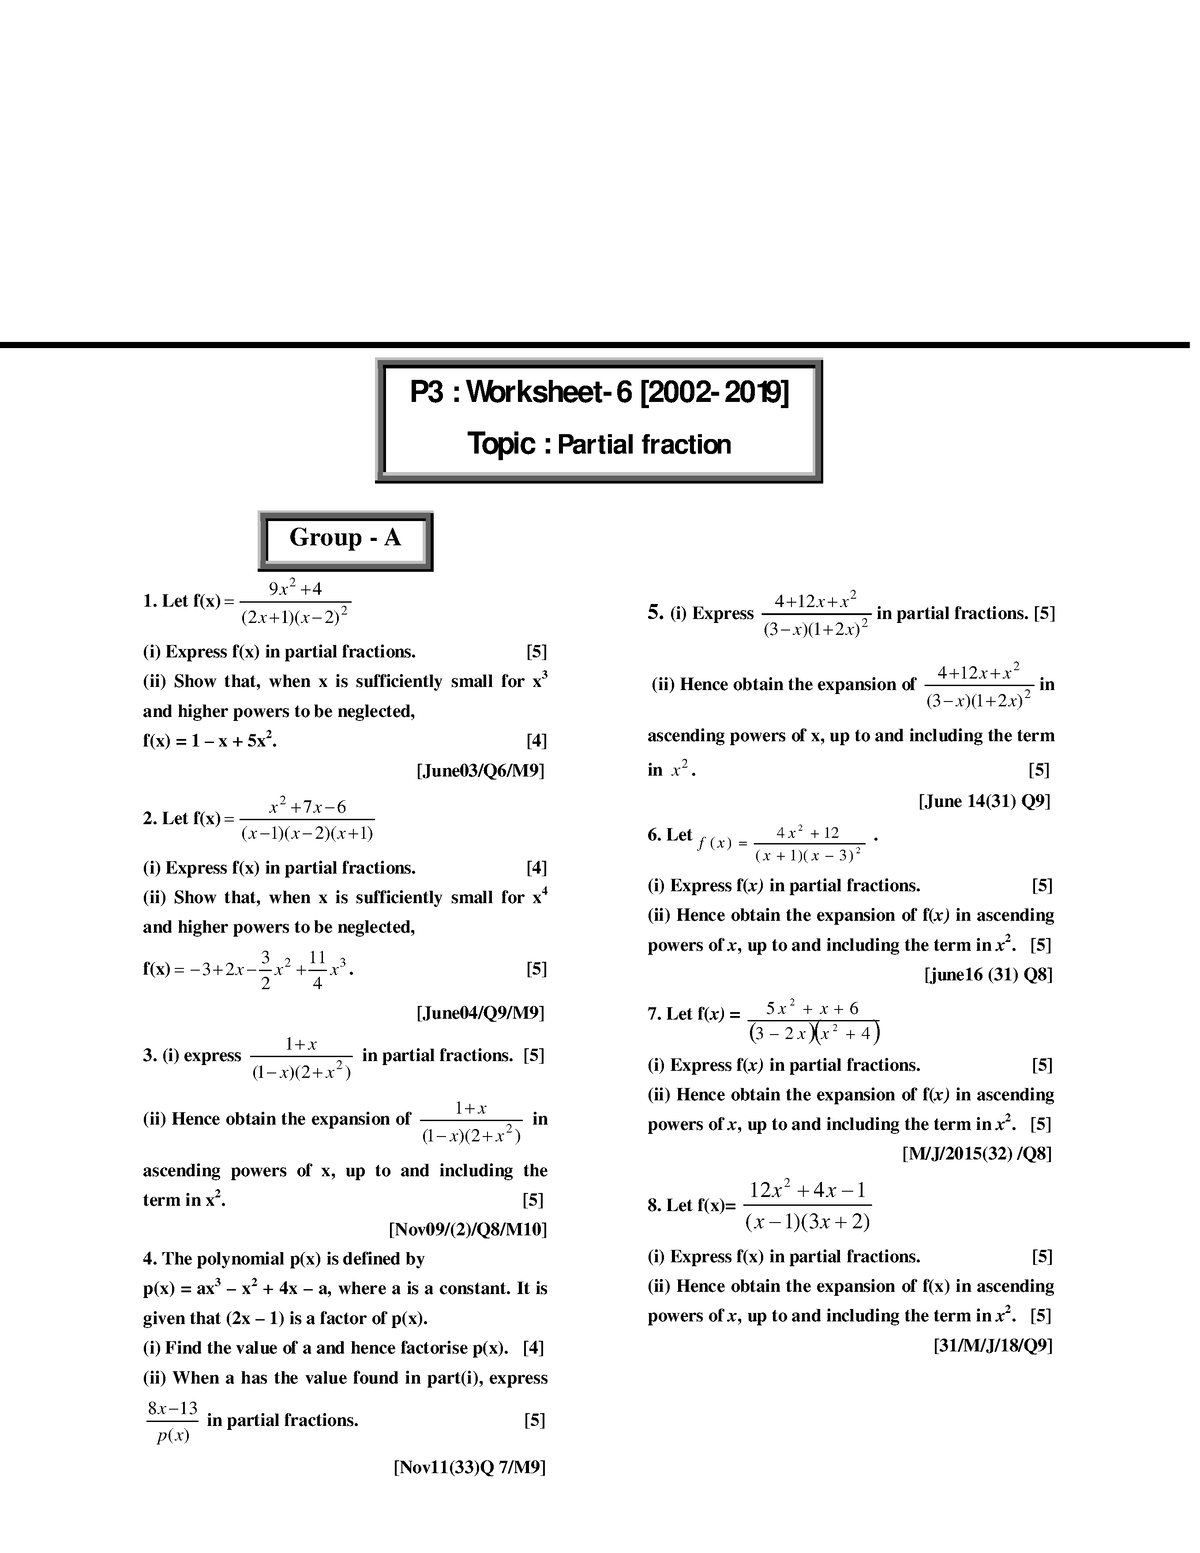 Worksheet 6 Partial Fraction Samim s Tutorial Ensures Quality Education An O A Level